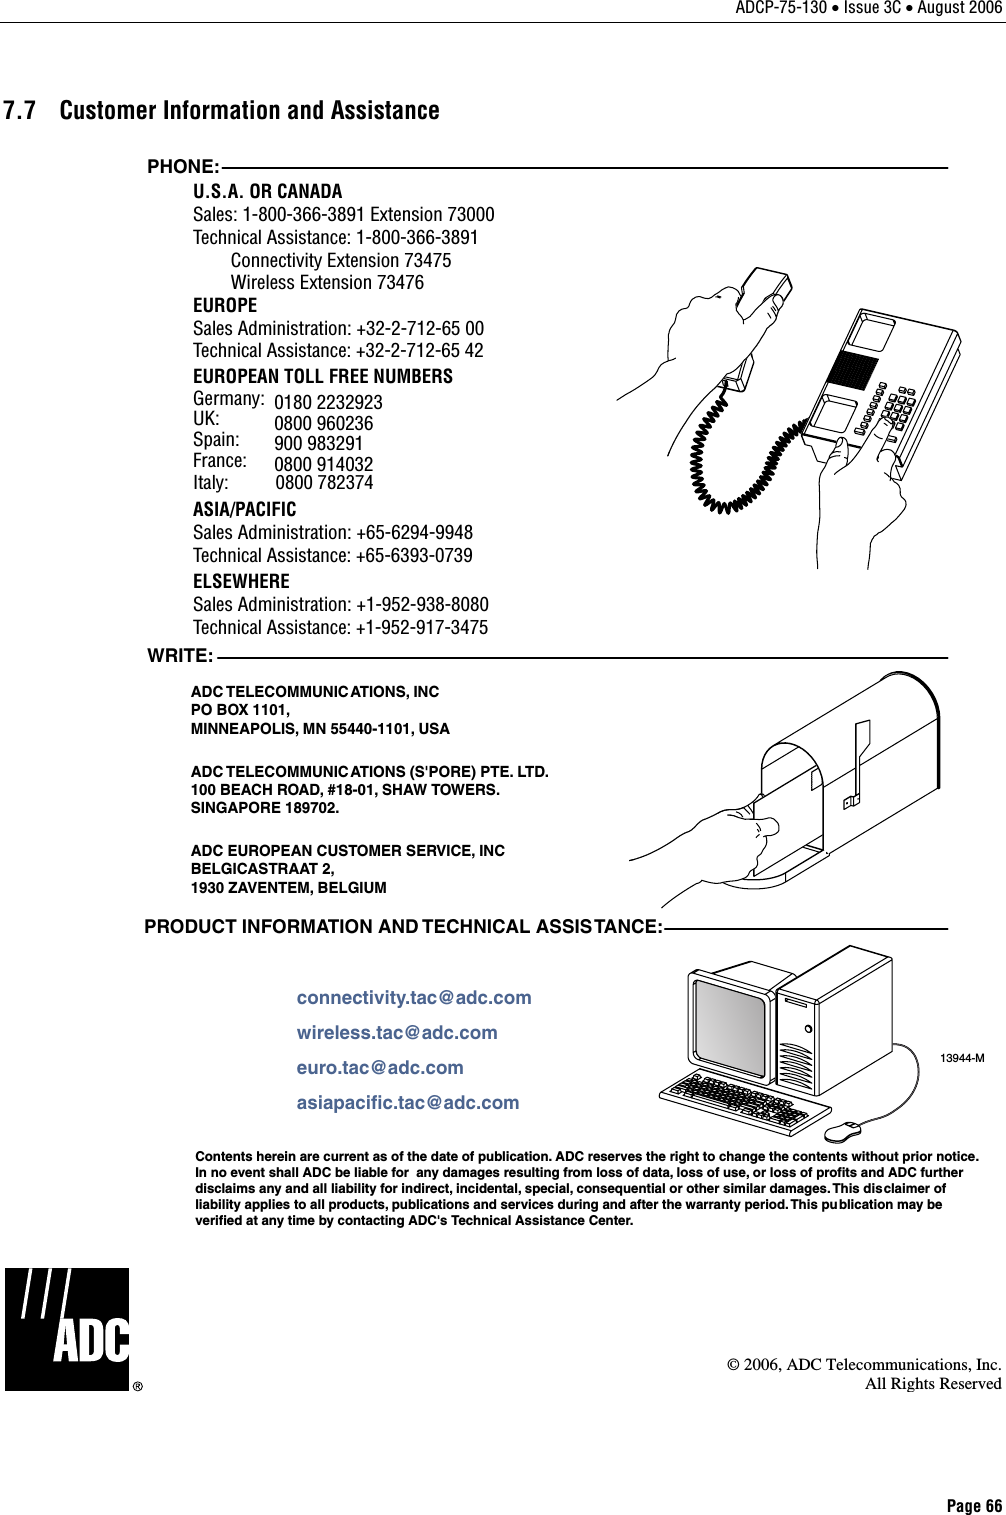 ADCP-75-130 • Issue 3C • August 2006 Page 66 7.7  Customer Information and Assistance 13944-MWRITE:ADC TELECOMMUNICATIONS, INCPO BOX 1101,MINNEAPOLIS, MN 55440-1101, USAADC TELECOMMUNIC ATIONS (S&apos;PORE) PTE. LTD.100 BEACH ROAD, #18-01, SHAW TOWERS.SINGAPORE 189702.ADC EUROPEAN CUSTOMER SERVICE, INCBELGICASTRAAT 2,1930 ZAVENTEM, BELGIUMPHONE:EUROPESales Administration: +32-2-712-65 00Technical Assistance: +32-2-712-65 42EUROPEAN TOLL FREE NUMBERSUK: 0800 960236Spain: 900 983291France: 0800 914032Germany: 0180 2232923U.S.A. OR CANADASales: 1-800-366-3891 Extension 73000Technical Assistance: 1-800-366-3891        Connectivity Extension 73475        Wireless Extension 73476ASIA/PACIFICSales Administration: +65-6294-9948Technical Assistance: +65-6393-0739ELSEWHERESales Administration: +1-952-938-8080Technical Assistance: +1-952-917-3475Italy:          0800 782374PRODUCT INFORMATION AND TECHNICAL ASSISTANCE:Contents herein are current as of the date of publication. ADC reserves the right to change the contents without prior notice.In no event shall ADC be liable for  any damages resulting from loss of data, loss of use, or loss of profits and ADC furtherdisclaims any and all liability for indirect, incidental, special, consequential or other similar damages. This disclaimer ofliability applies to all products, publications and services during and after the warranty period. This pu blication may beverified at any time by contacting ADC&apos;s Technical Assistance Center. euro.tac@adc.comasiapacific.tac@adc.comwireless.tac@adc.comconnectivity.tac@adc.com  © 2006, ADC Telecommunications, Inc.All Rights Reserved 